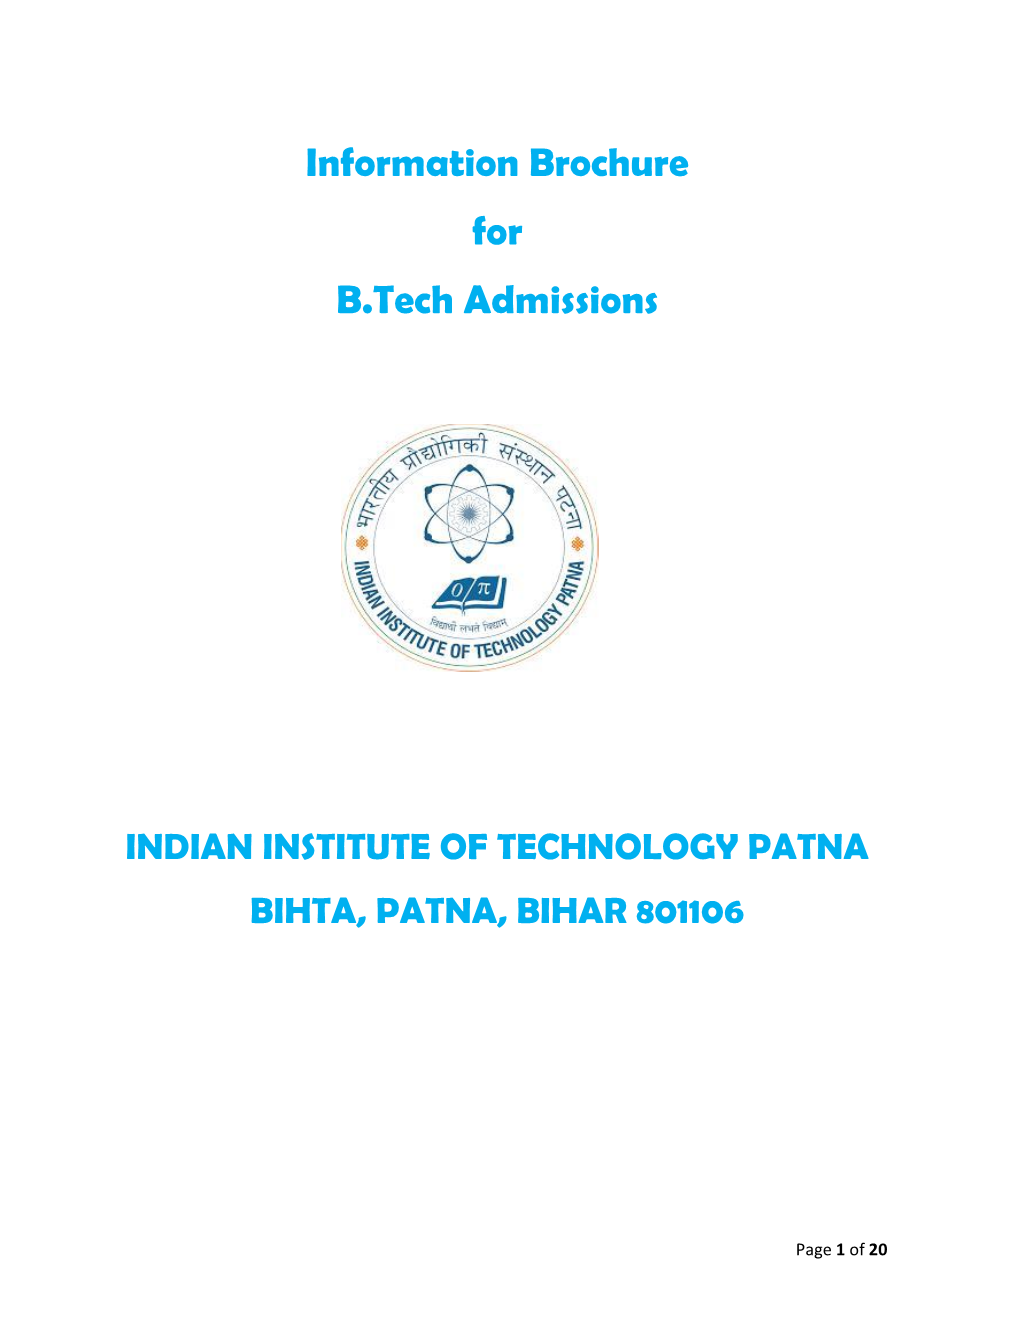 Information Brochure for B.Tech Admissions